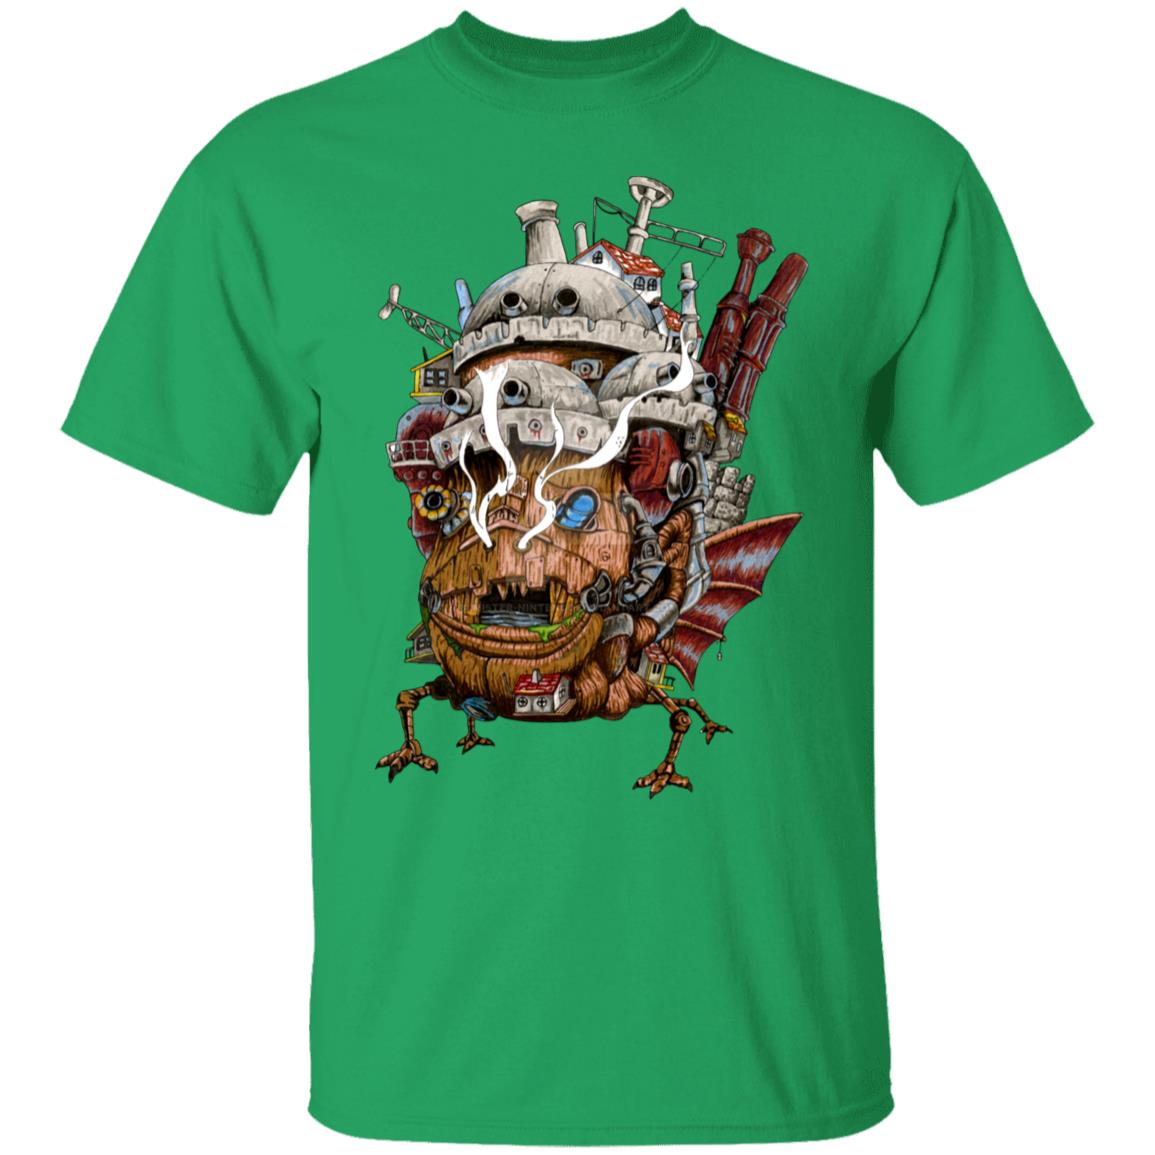 Howl’s Moving Castle – Smoking T Shirt